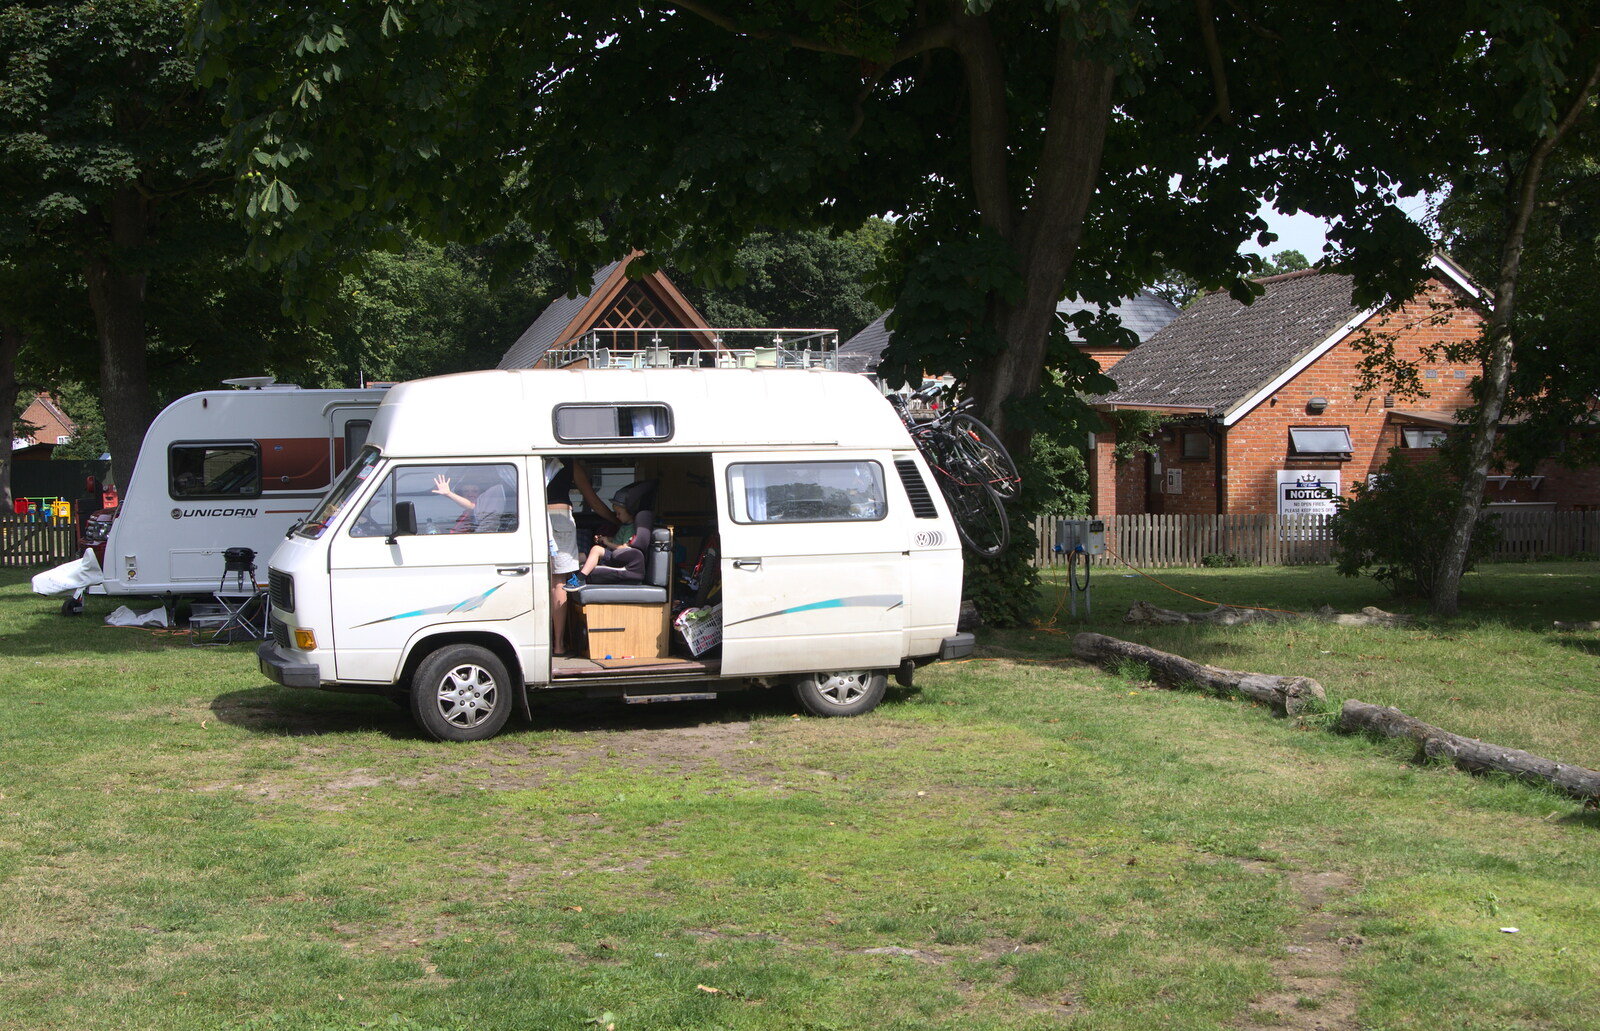 The van is all packed up, ready to head off from The Archaeology of Dunwich: A Camping Trip, Dunwich, Suffolk - 1st August 2015